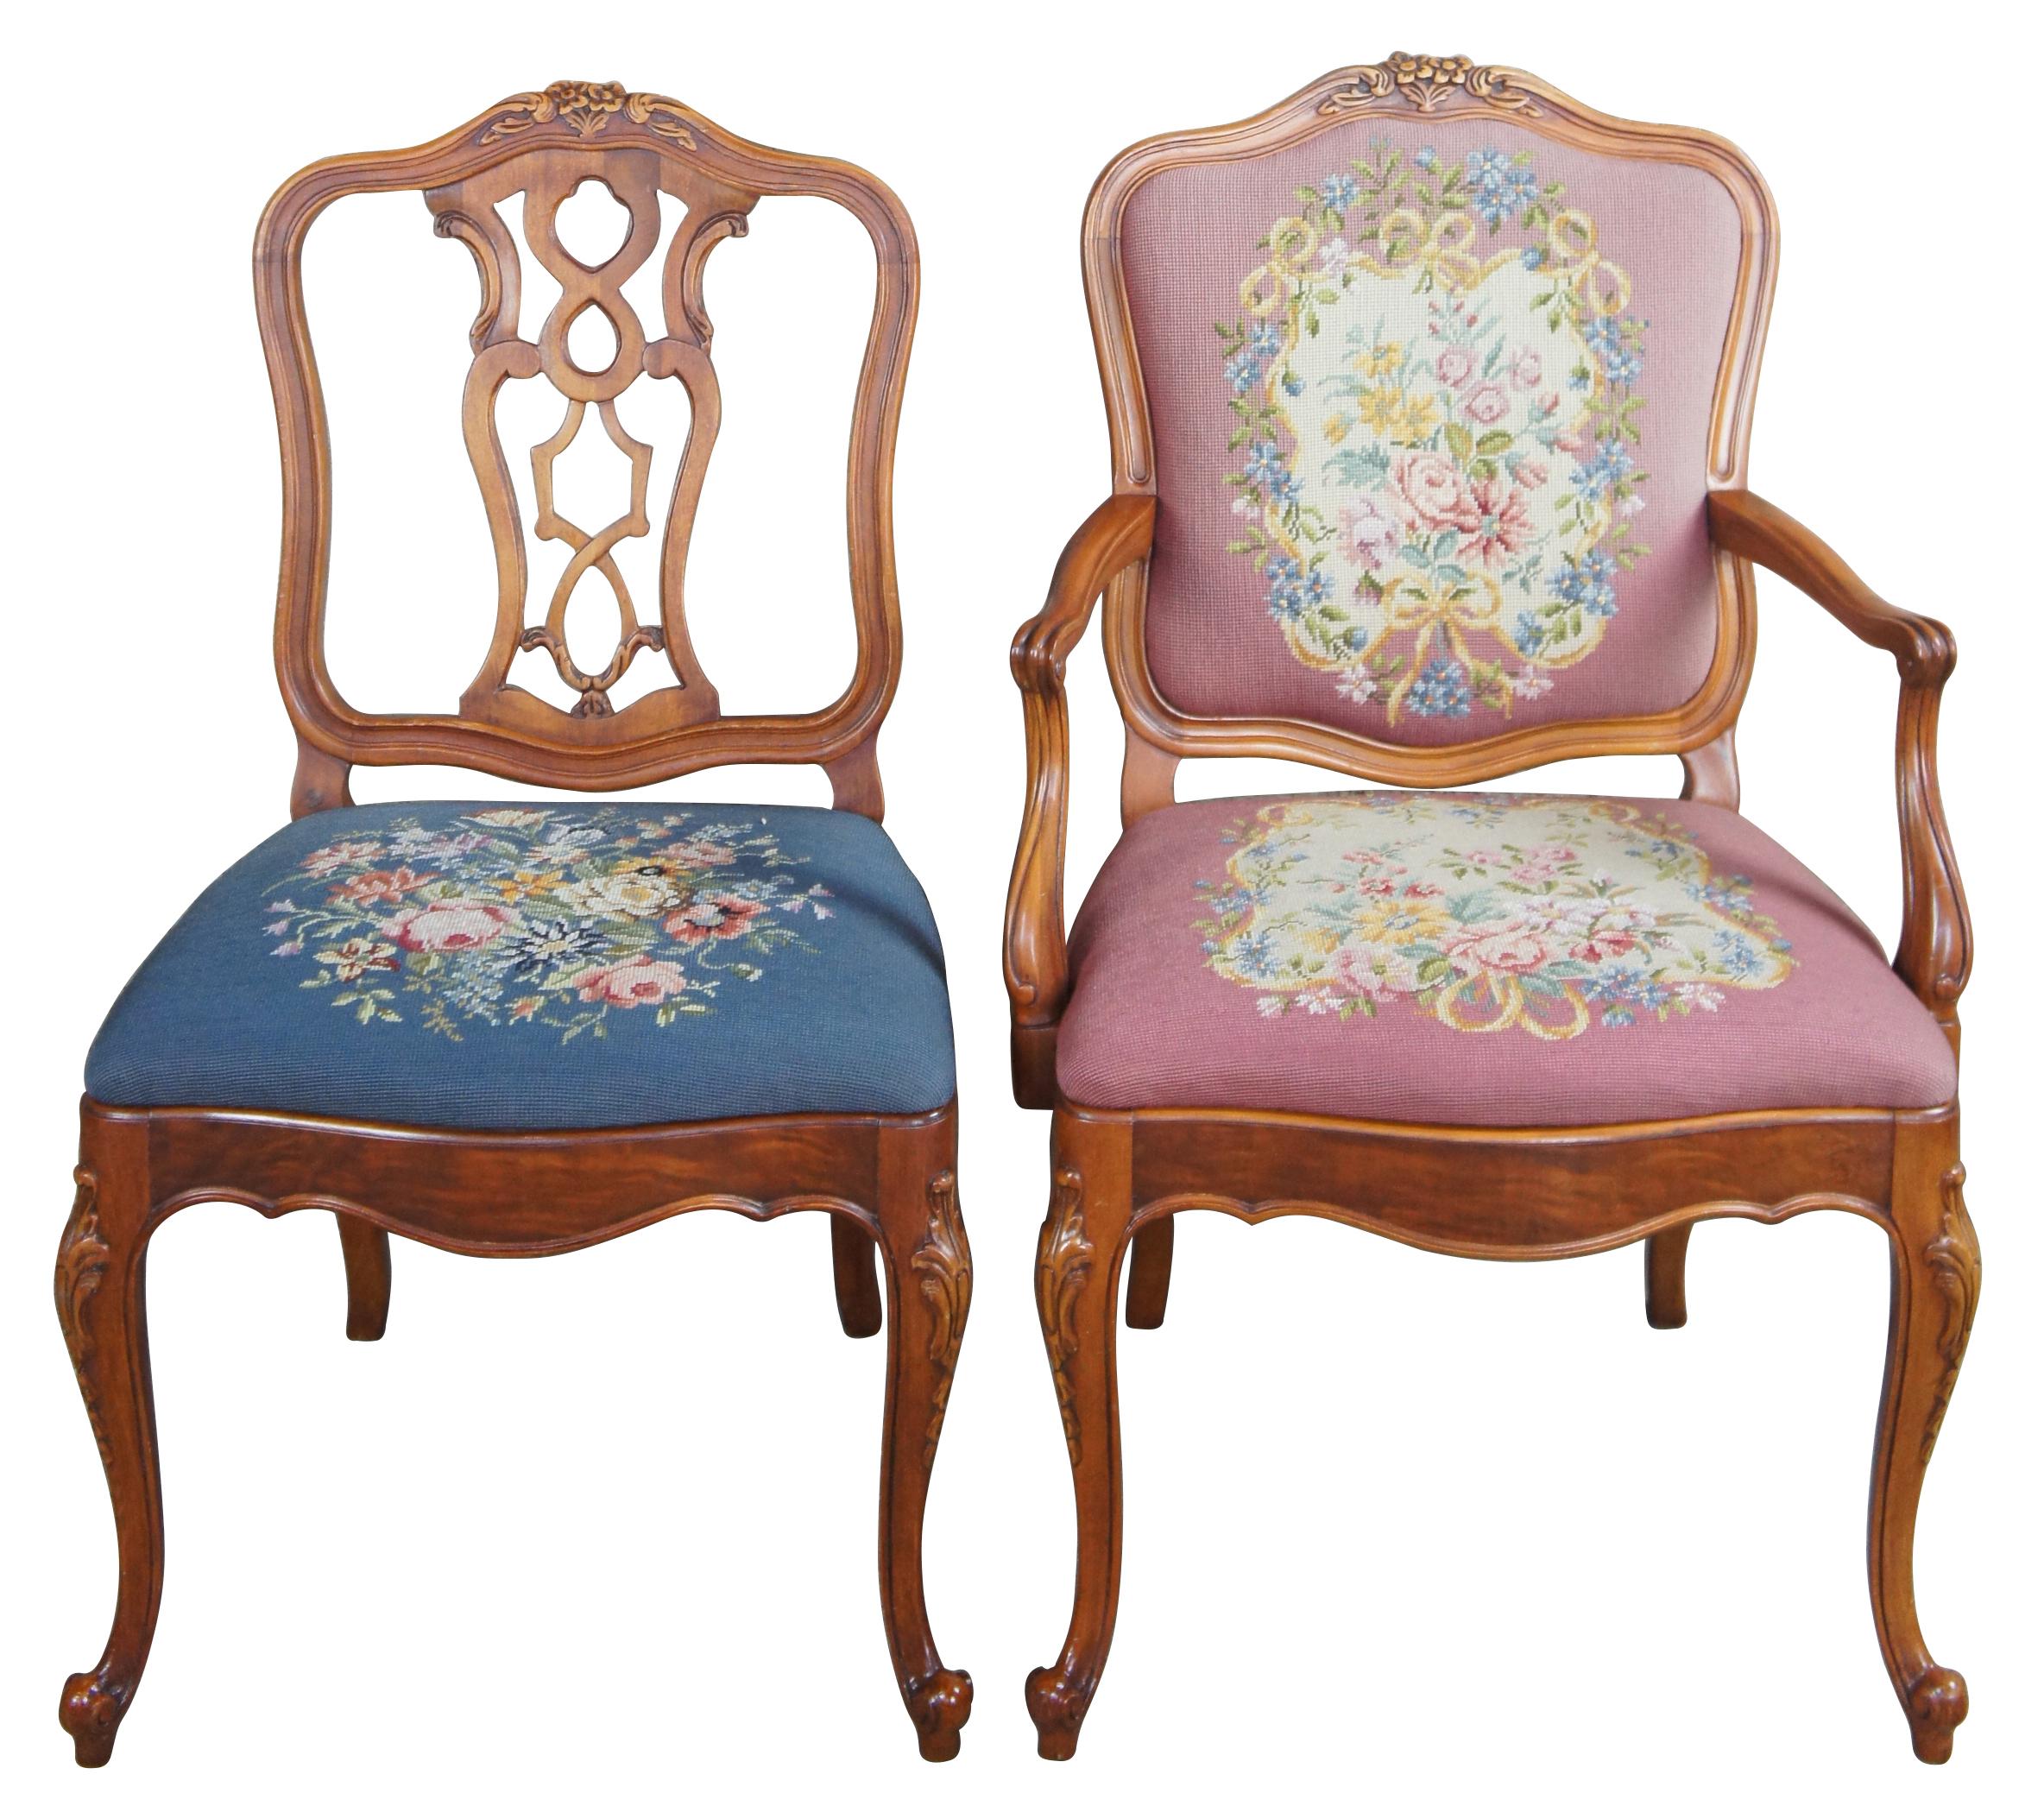 Mount Airy needlepoint dining chairs, circa 1940s. Made from walnut with open pierced splat, carved accents, cabriole legs and needlepoint seats. Mount Airy of North Carolina's roots go back to 1888 when the lumber and woodworking industry was